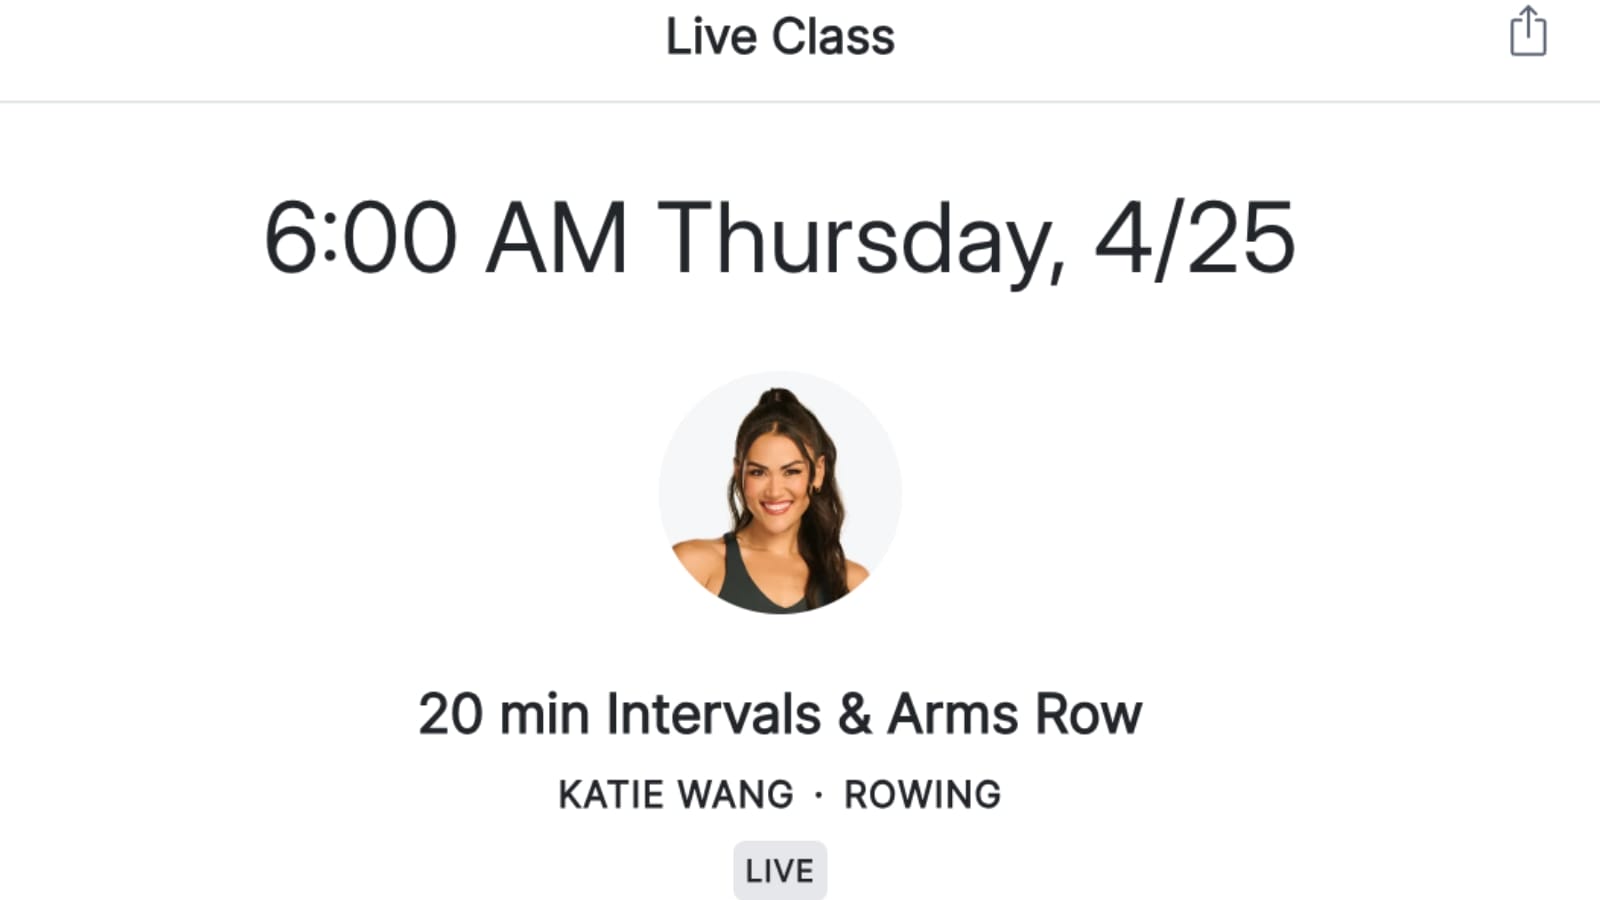 Peloton Intervals & Arms rowing class with Katie Wang on the schedule.